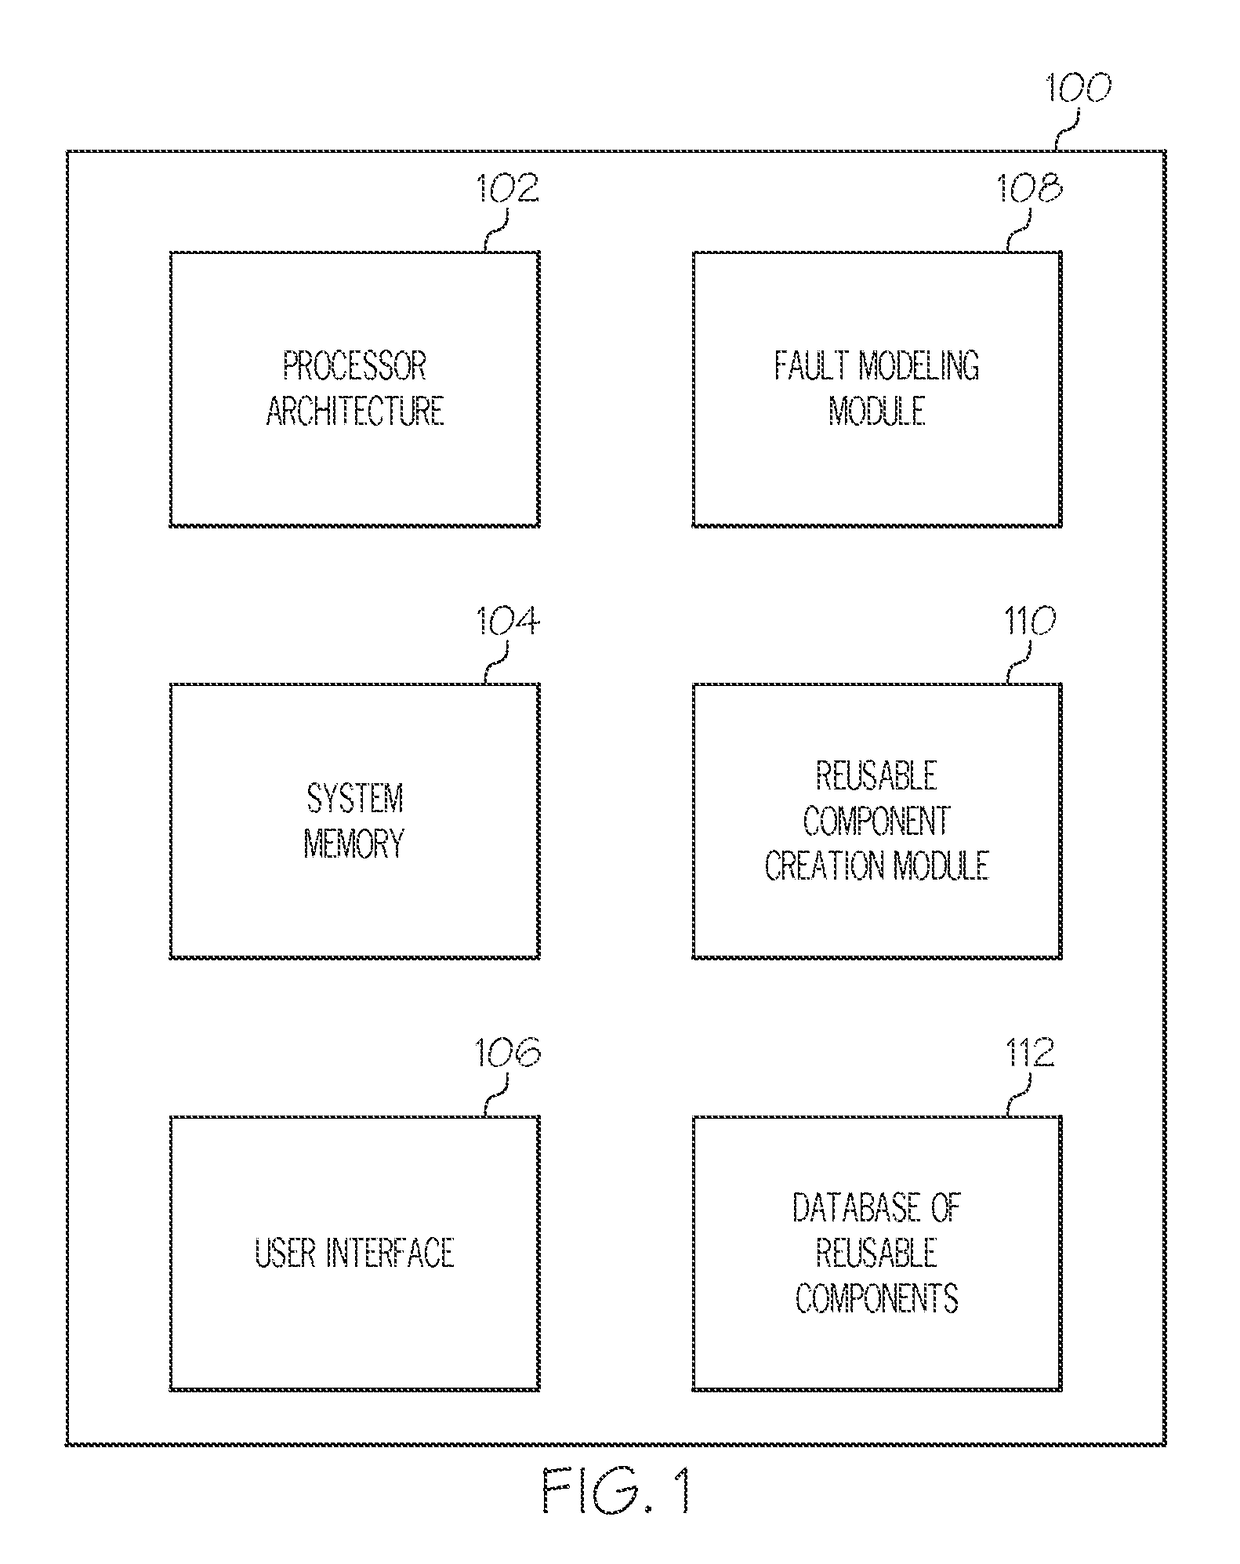 Methods and apparatus for the creation and use of reusable fault model components in fault modeling and complex system prognostics